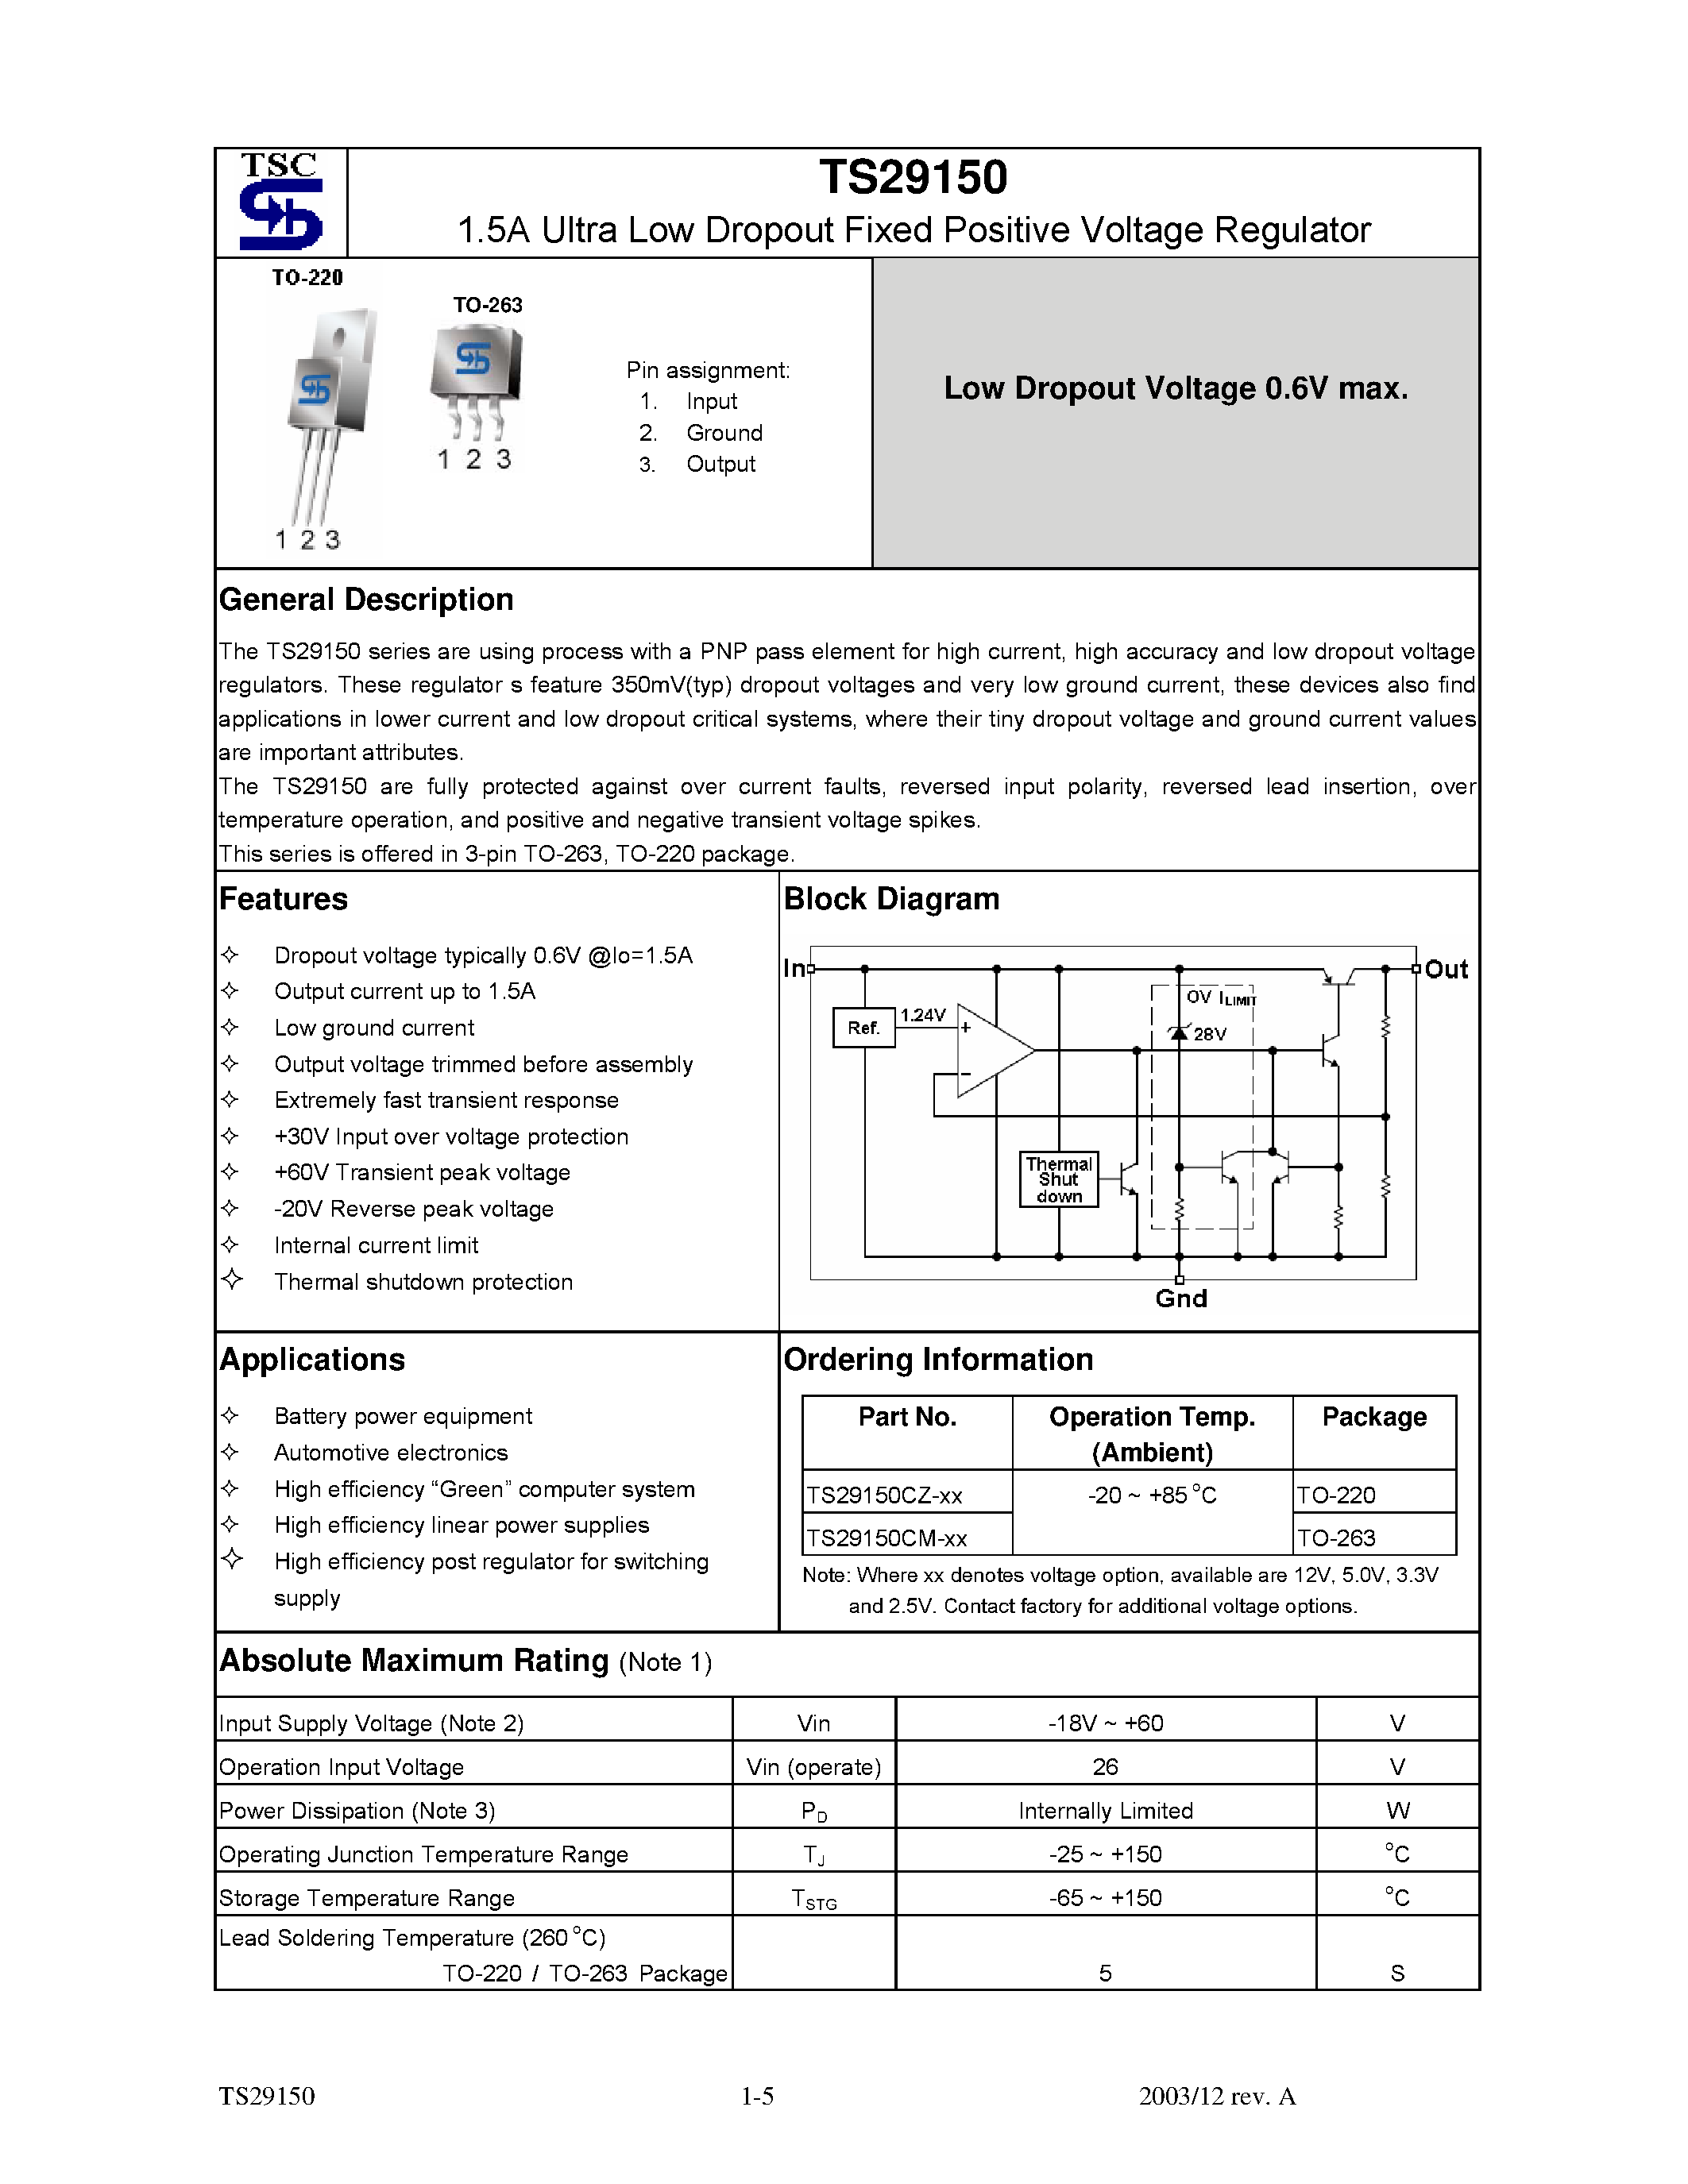 Datasheet TS29150 - 1.5A Ultra Low Dropout Fixed Positive Voltage Regulator page 1